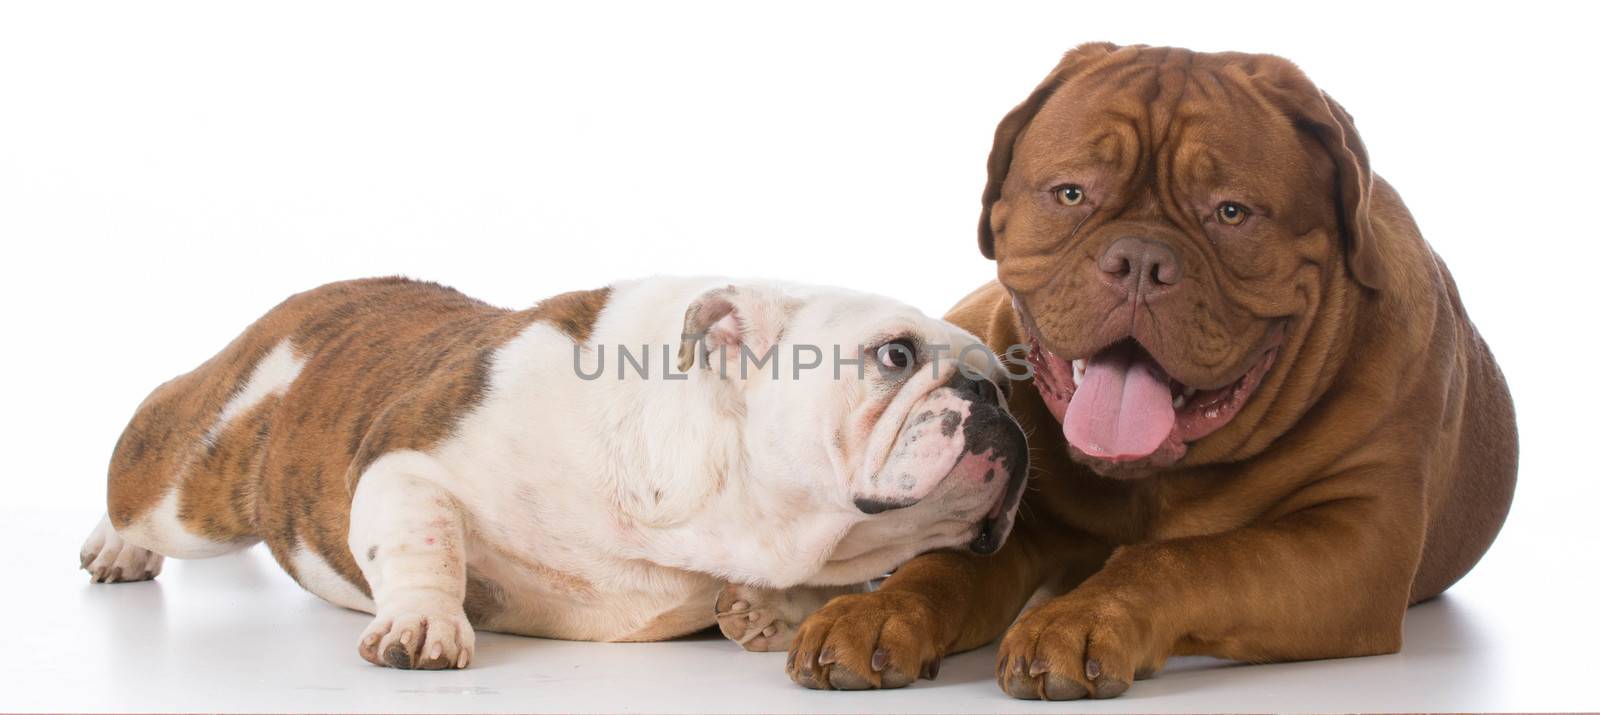 bulldog trying to make friends with dogue de bordeaux on white background